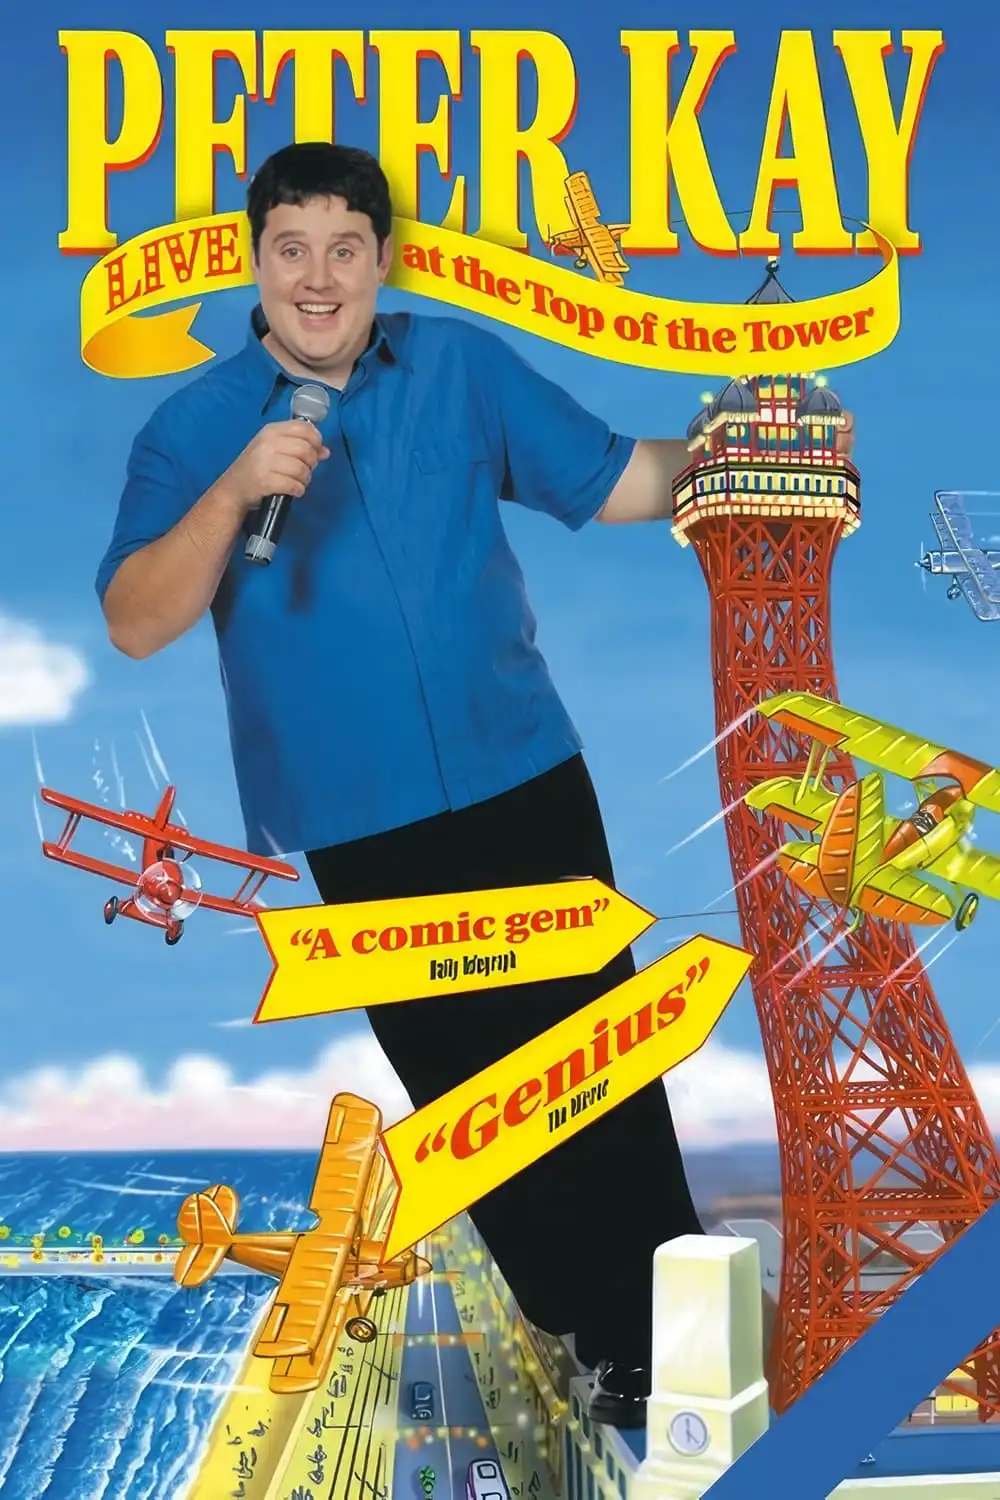 Watch and Download Peter Kay: Live at the Top of the Tower